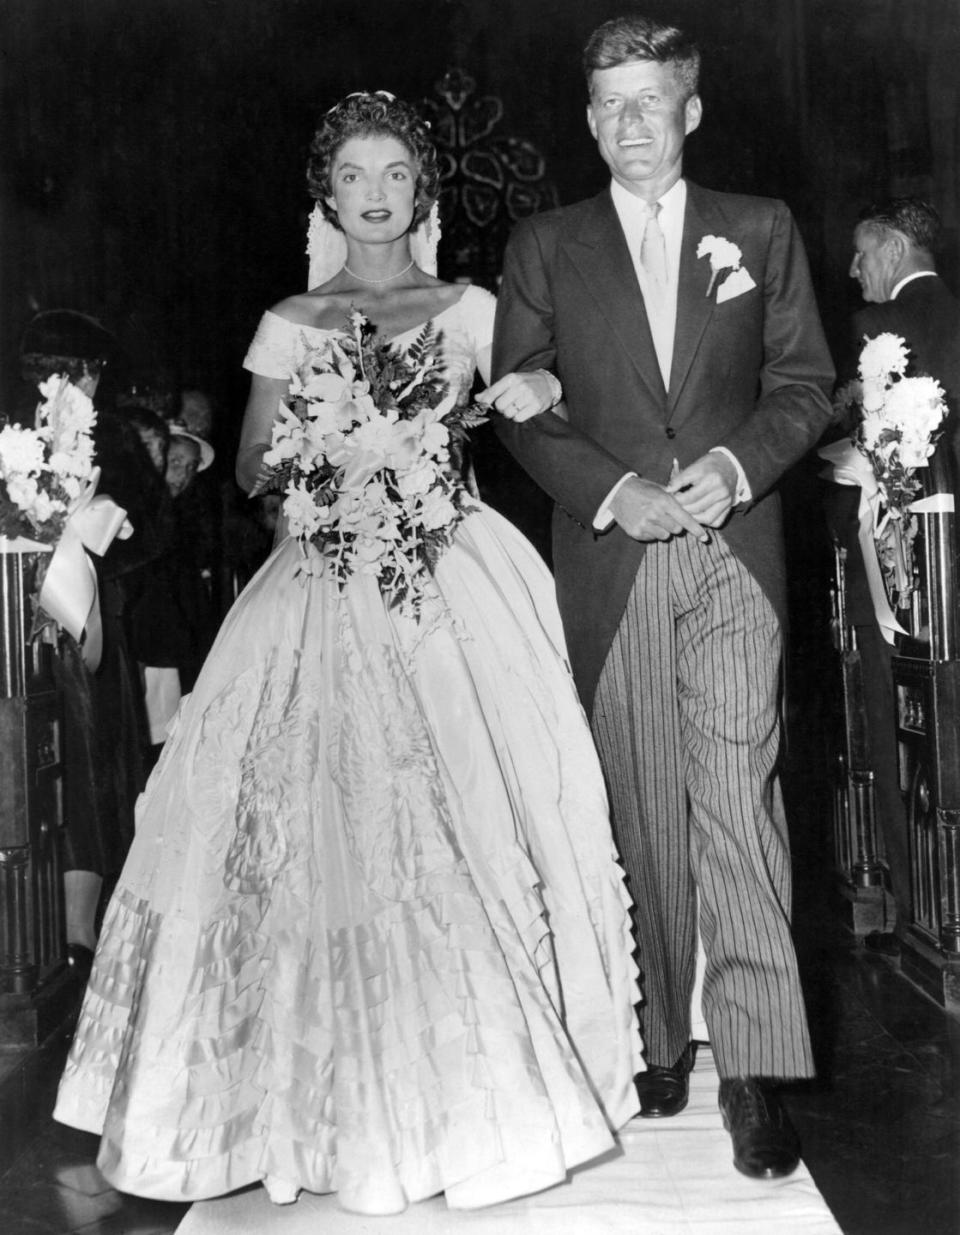 <p>Jacqueline Bouvier and JFK's Rhode Island wedding ceremony was not one to be forgotten. The bride's iconic full-skirted off-the-shoulder ball gown was designed by Ann Lowe, an African-American seamstress who worked for America's elite families such as the Roosevelt's and the Rockefeller's, in addition to the Kennedy's.</p>